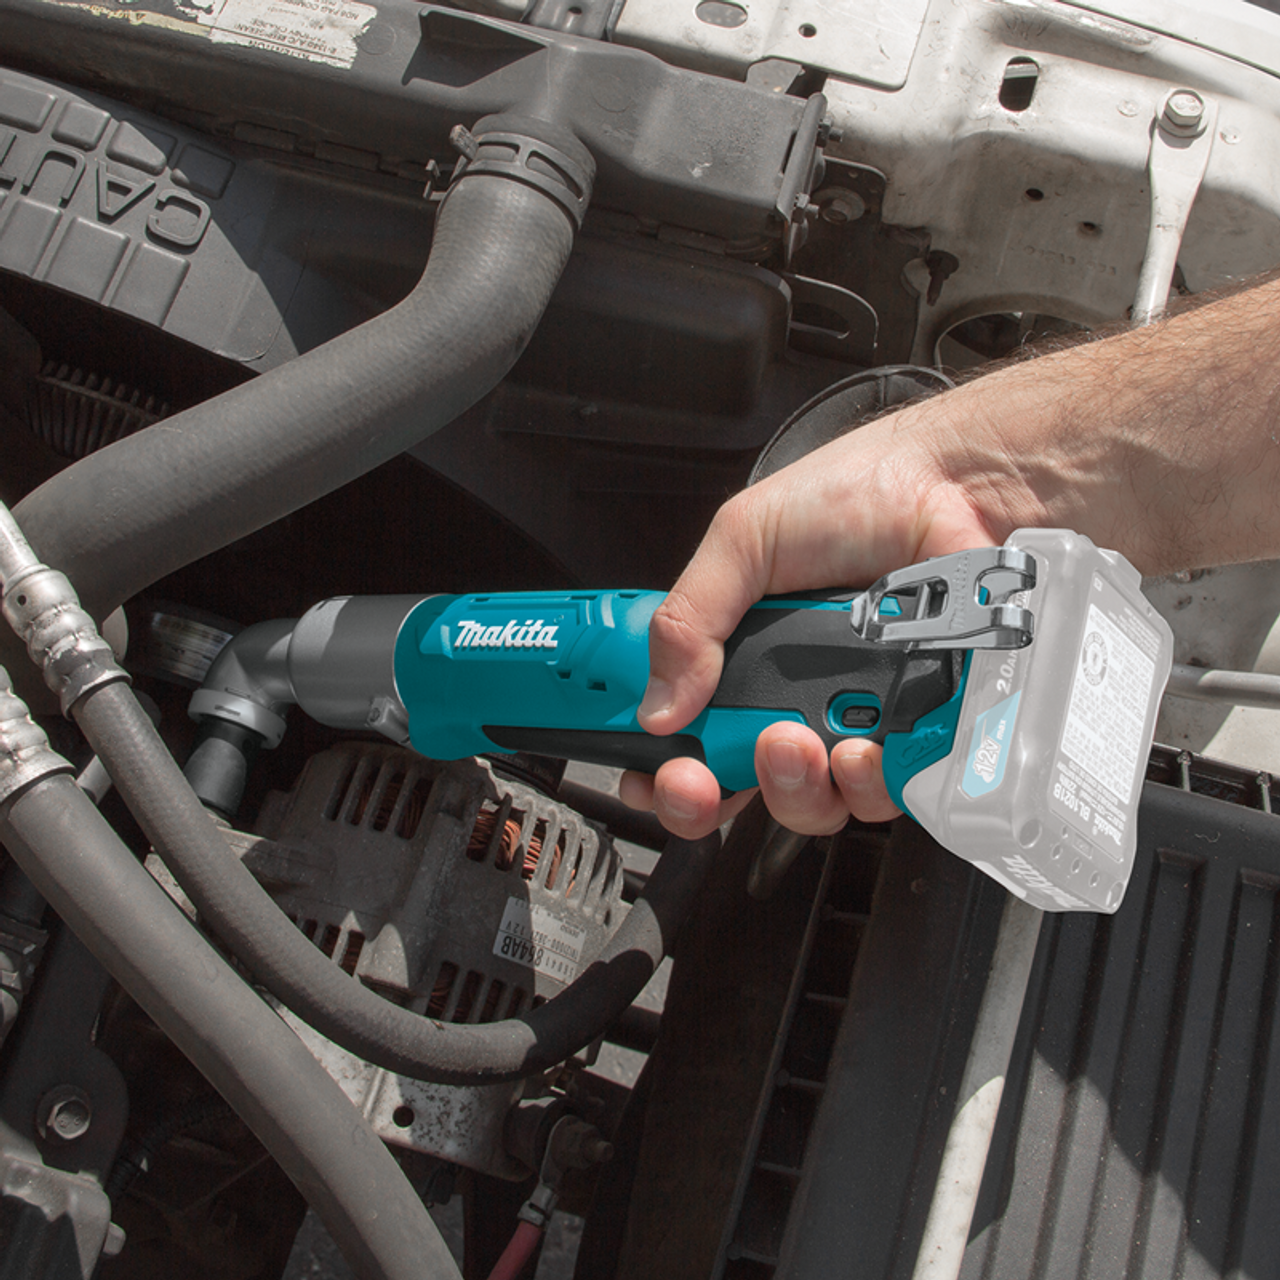 12V max CXT? Lithium-Ion Cordless 3/8" Angle Impact Wrench, Tool Only, Makita-built motor, LT02Z